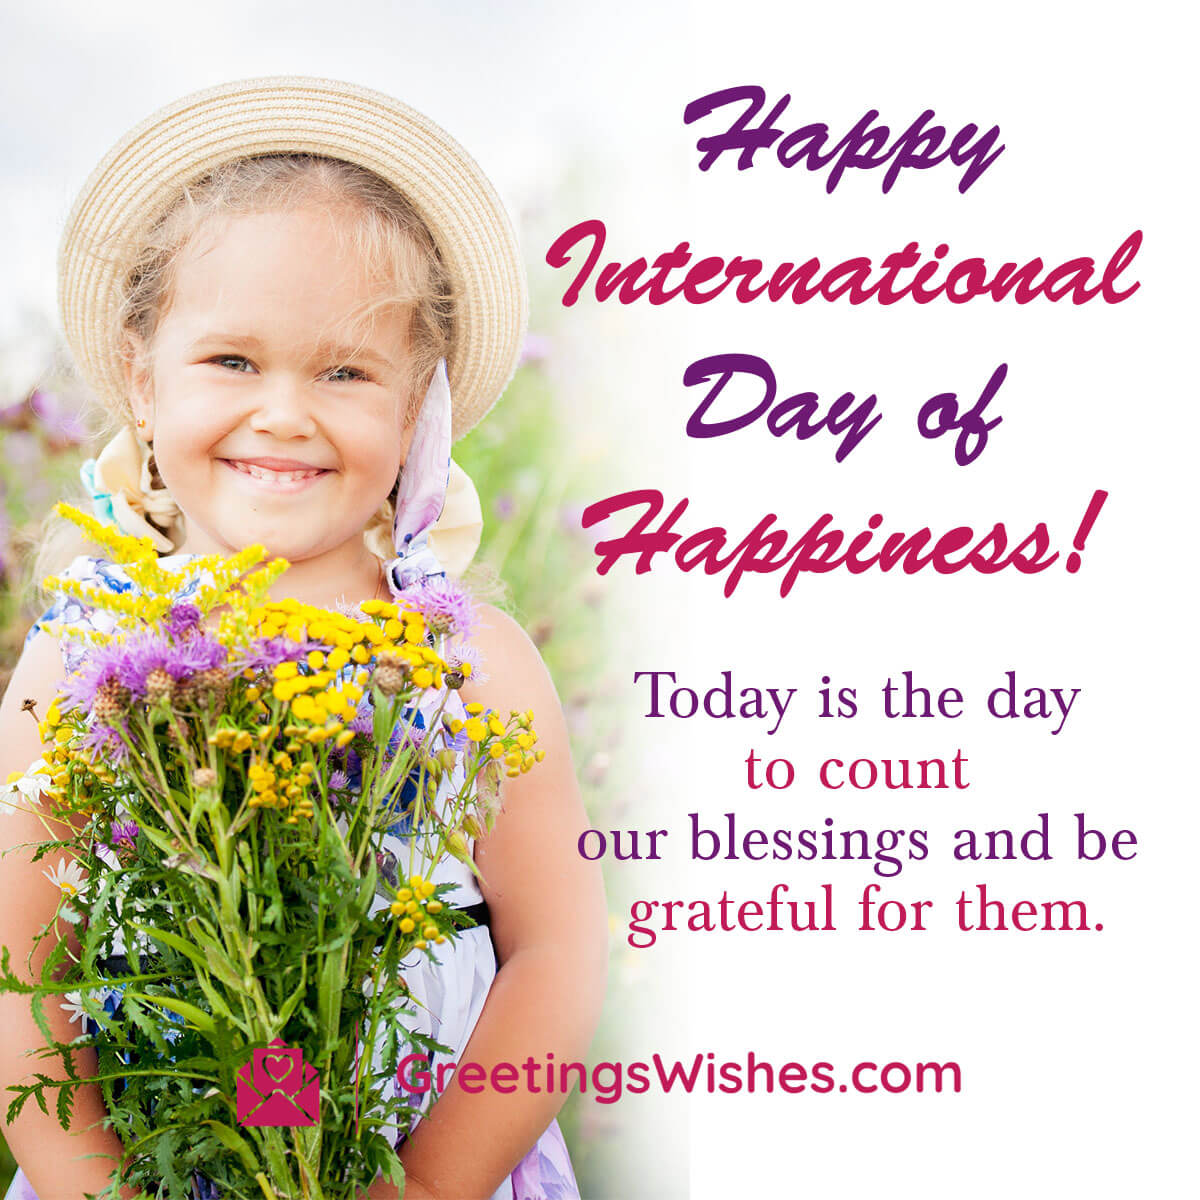 Happiness Day Greetings